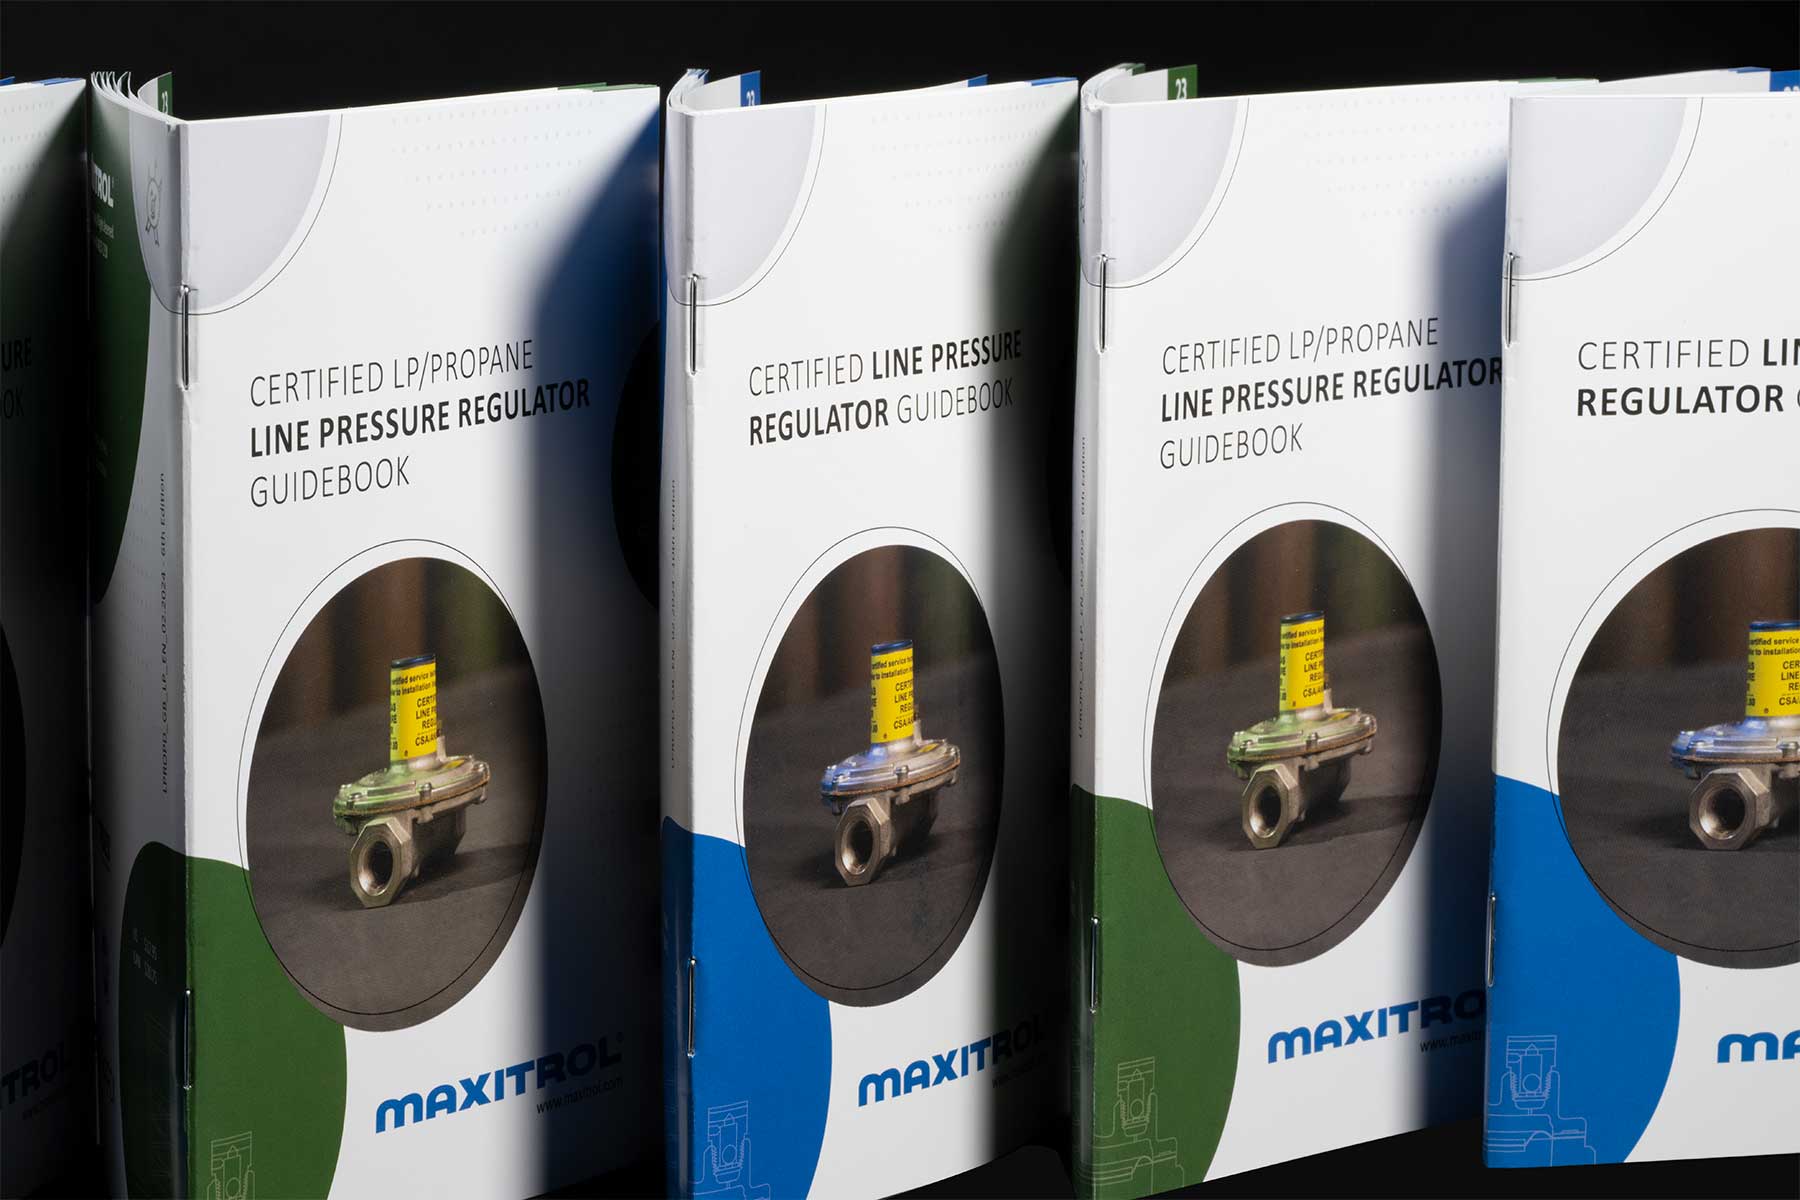 New editions of Maxitrol’s Certified Line Pressure Regulator Guidebooks for natural gas and LP/Propane